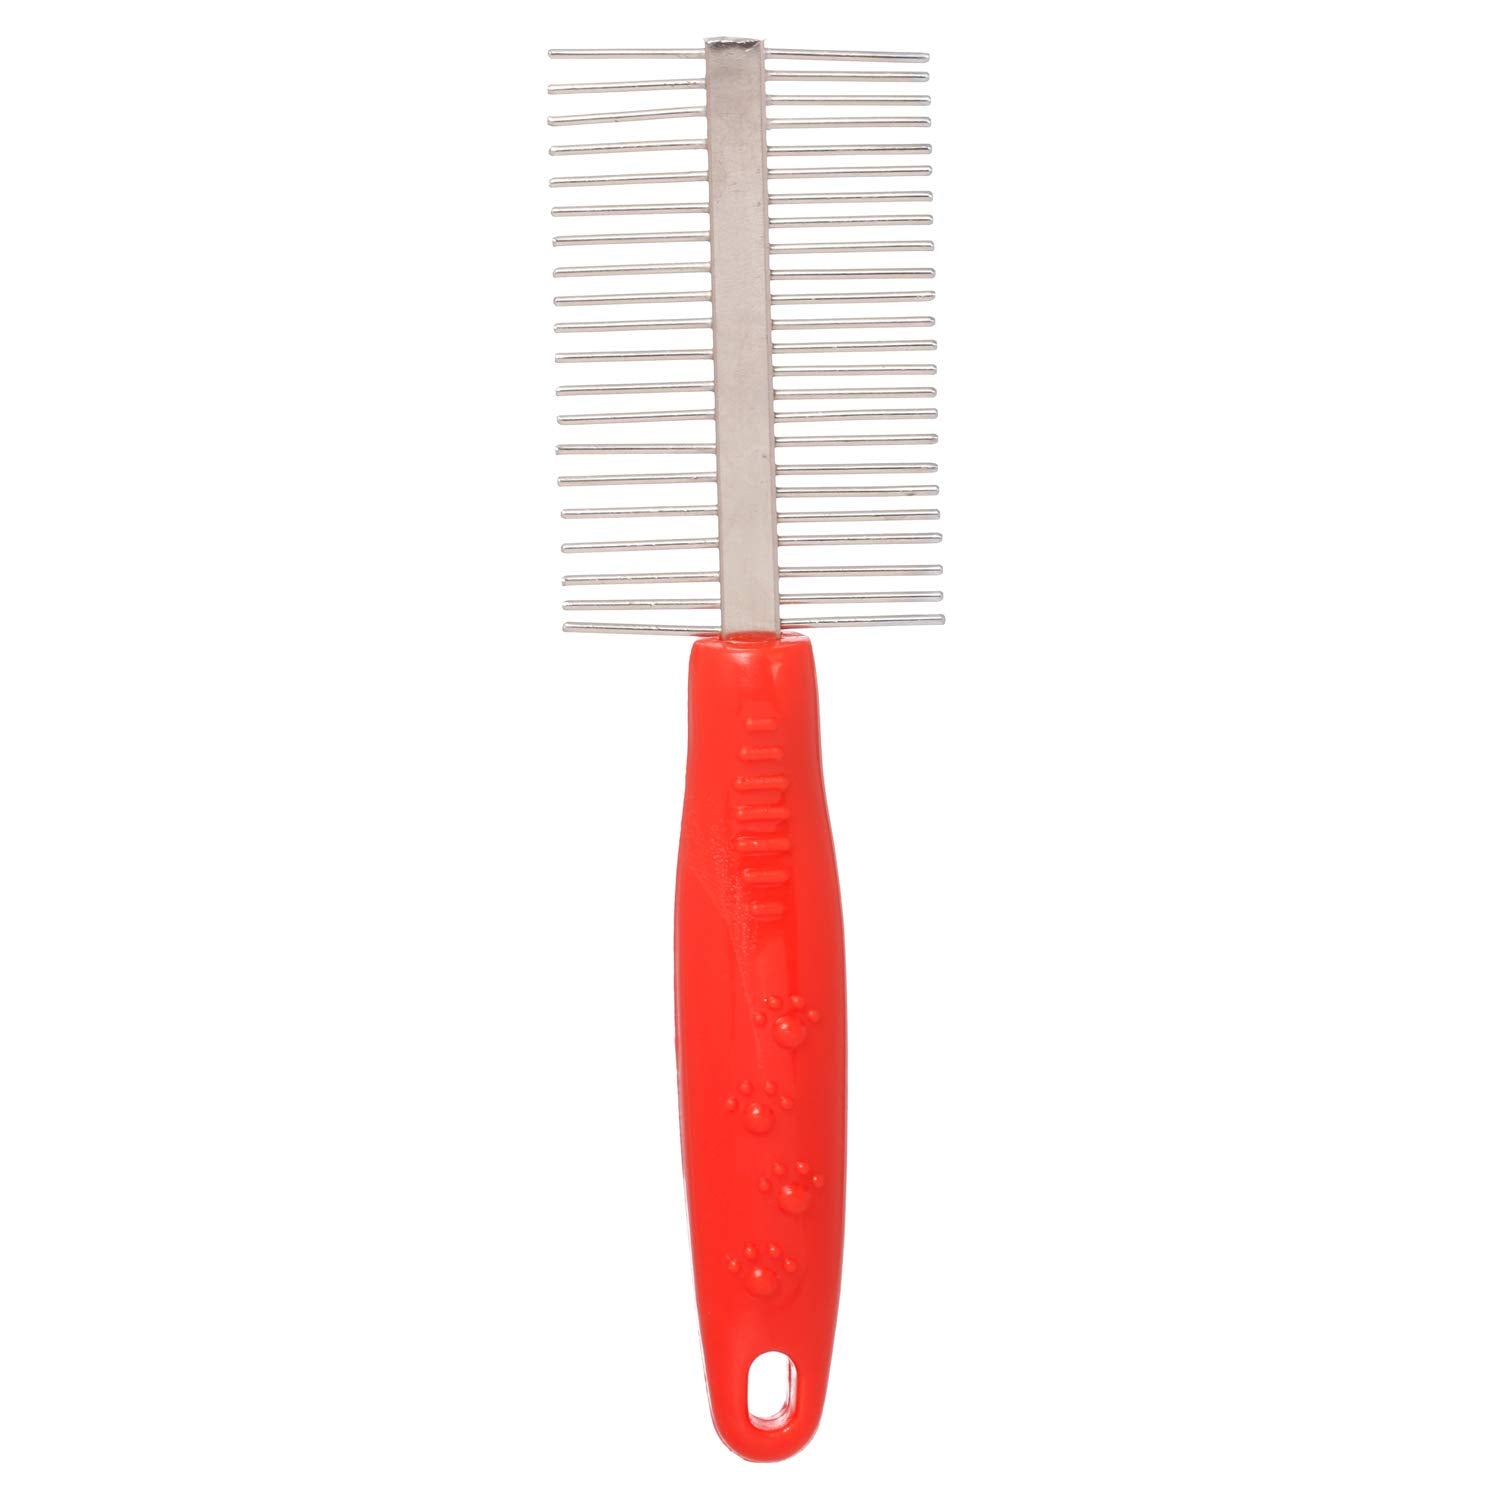 Double Sided Pet Comb Stainless Steel - Medium (Red) freeshipping - Indihopshop